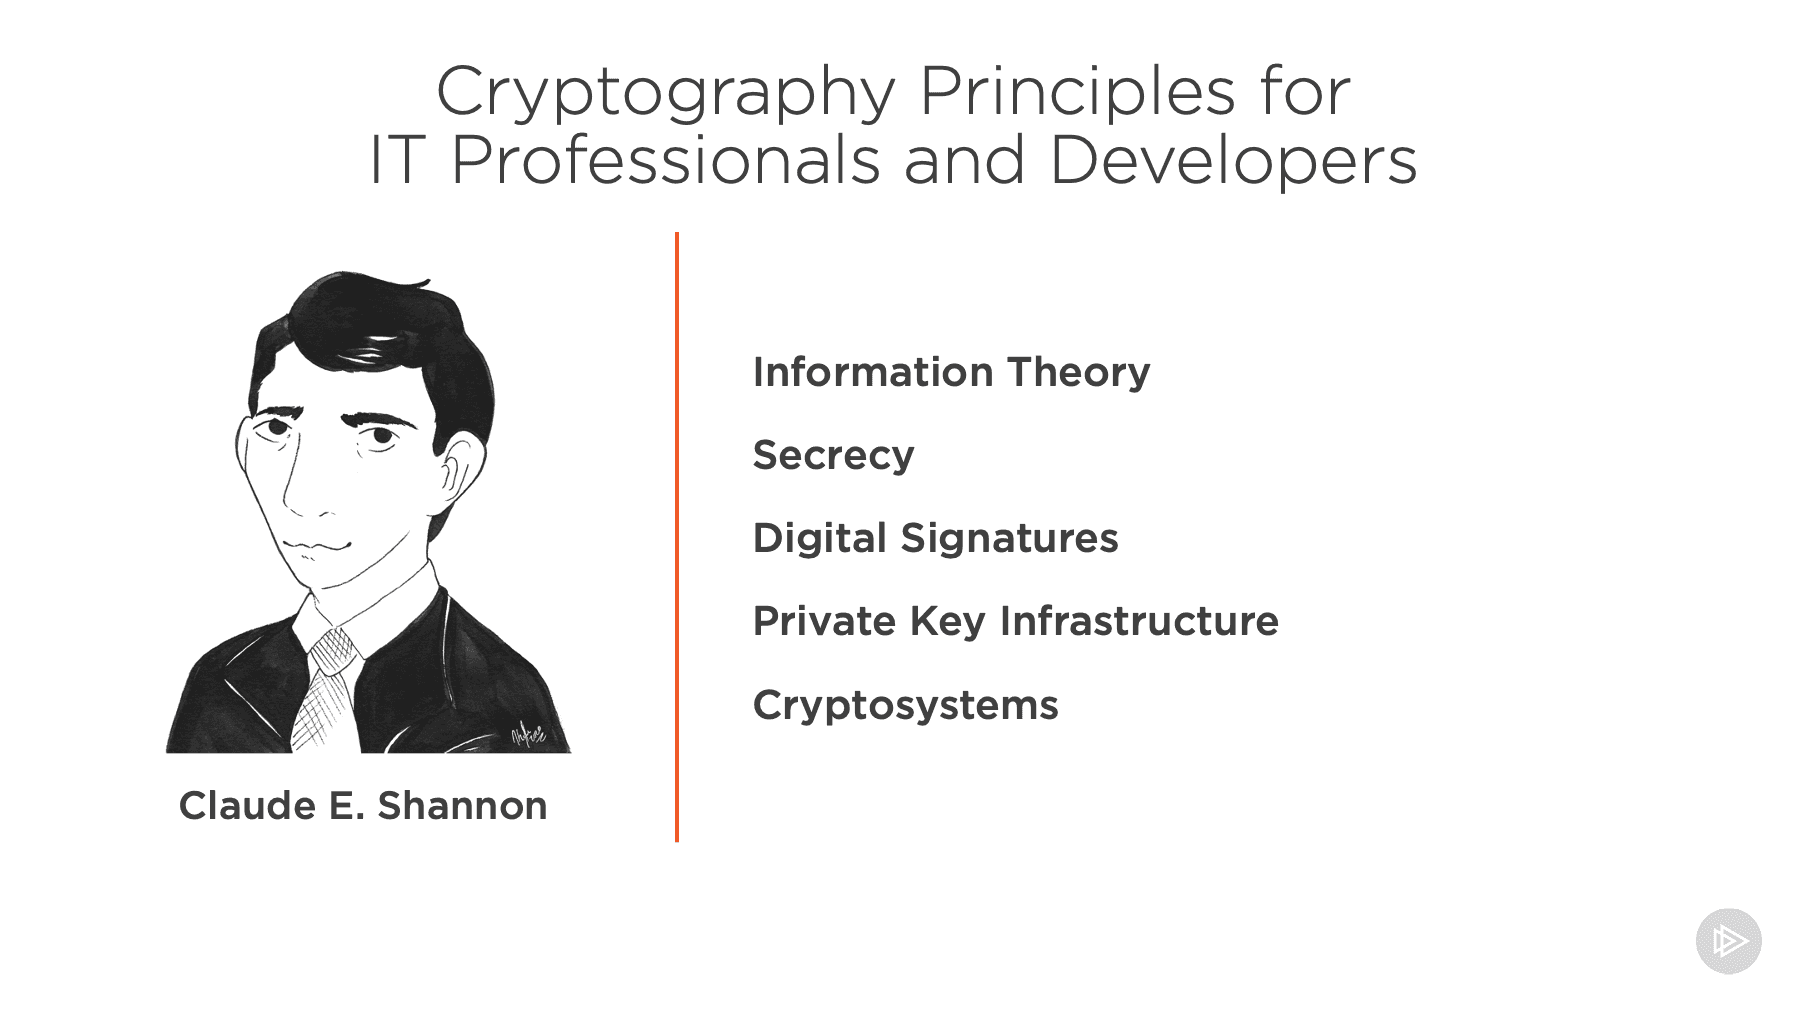 Cryptography Principles for IT Professionals and Developers